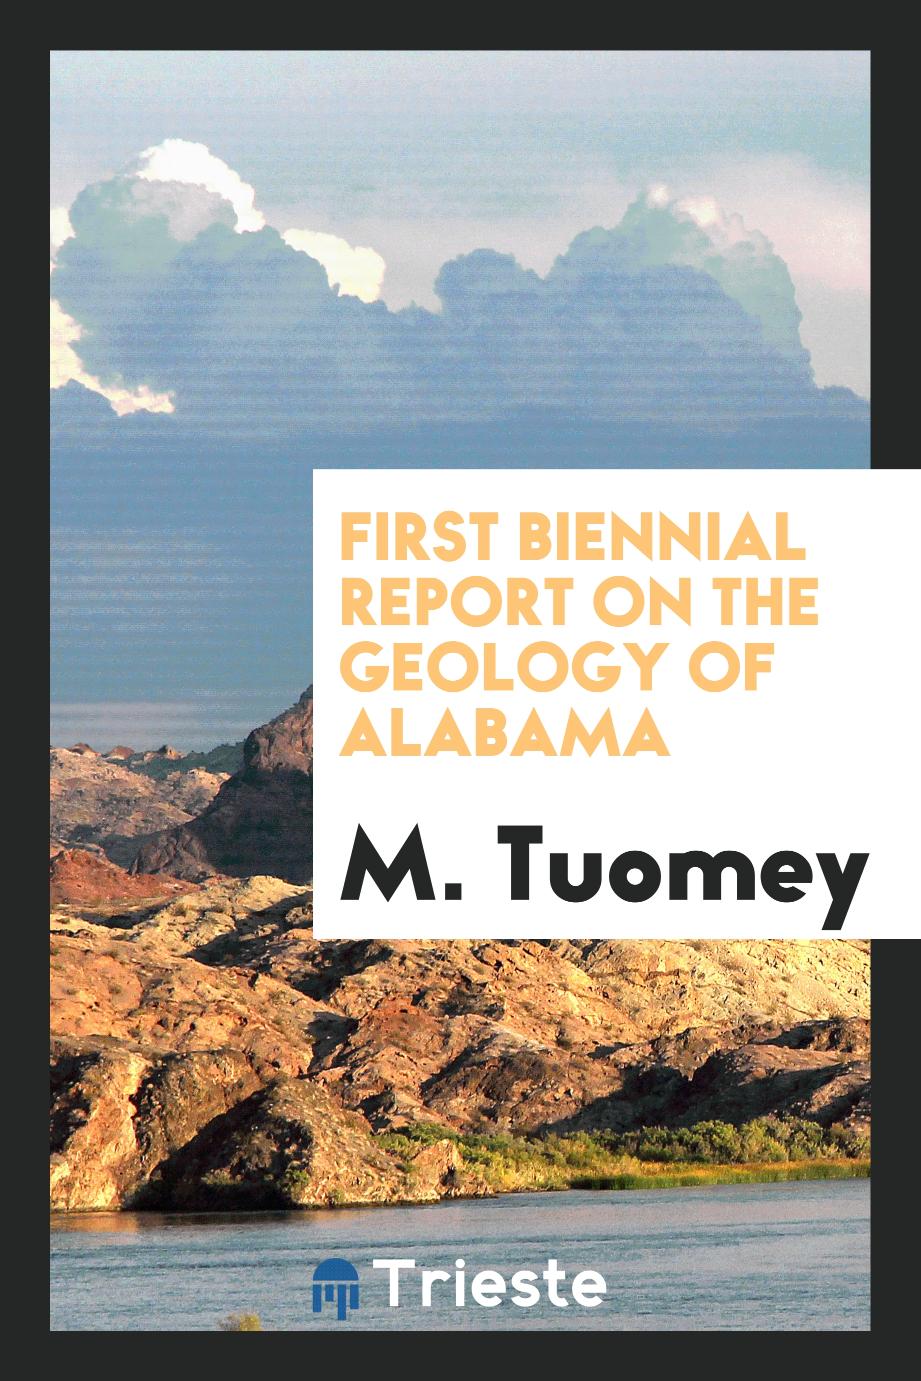 First Biennial Report on the Geology of Alabama